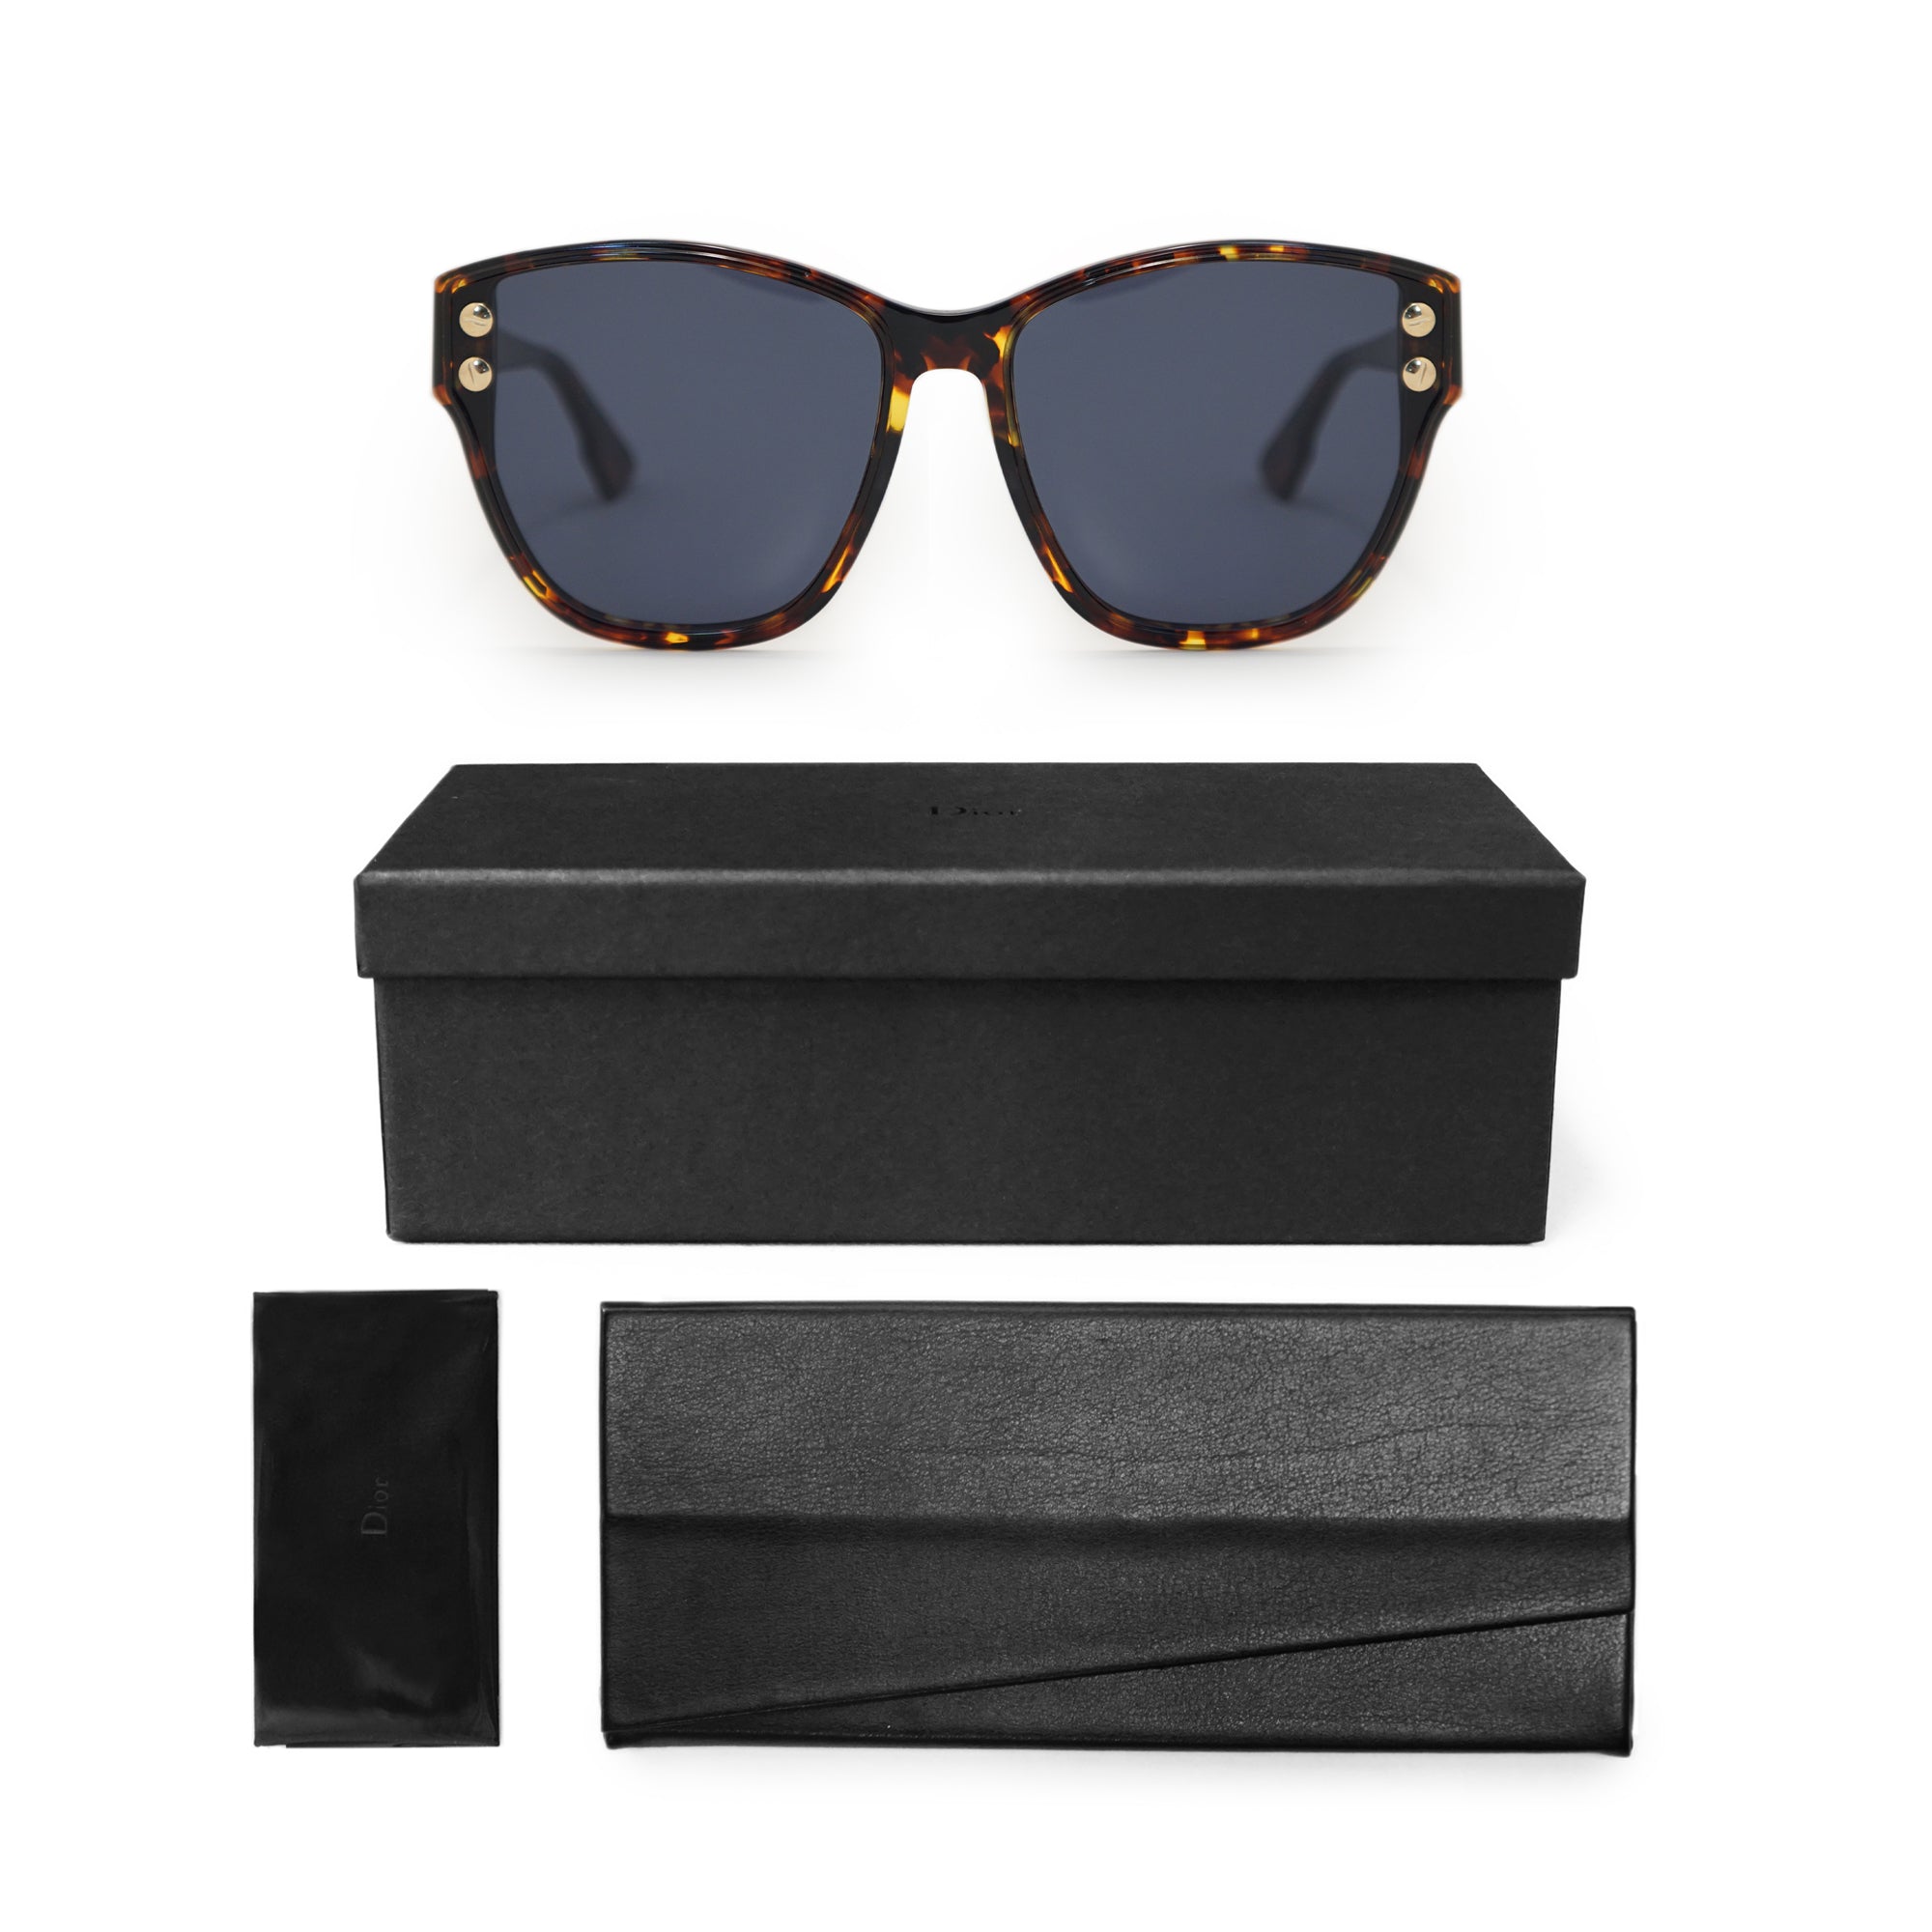 title:Dior overzised Sunglasses Addict 3F P65A9 62;color:not applicable